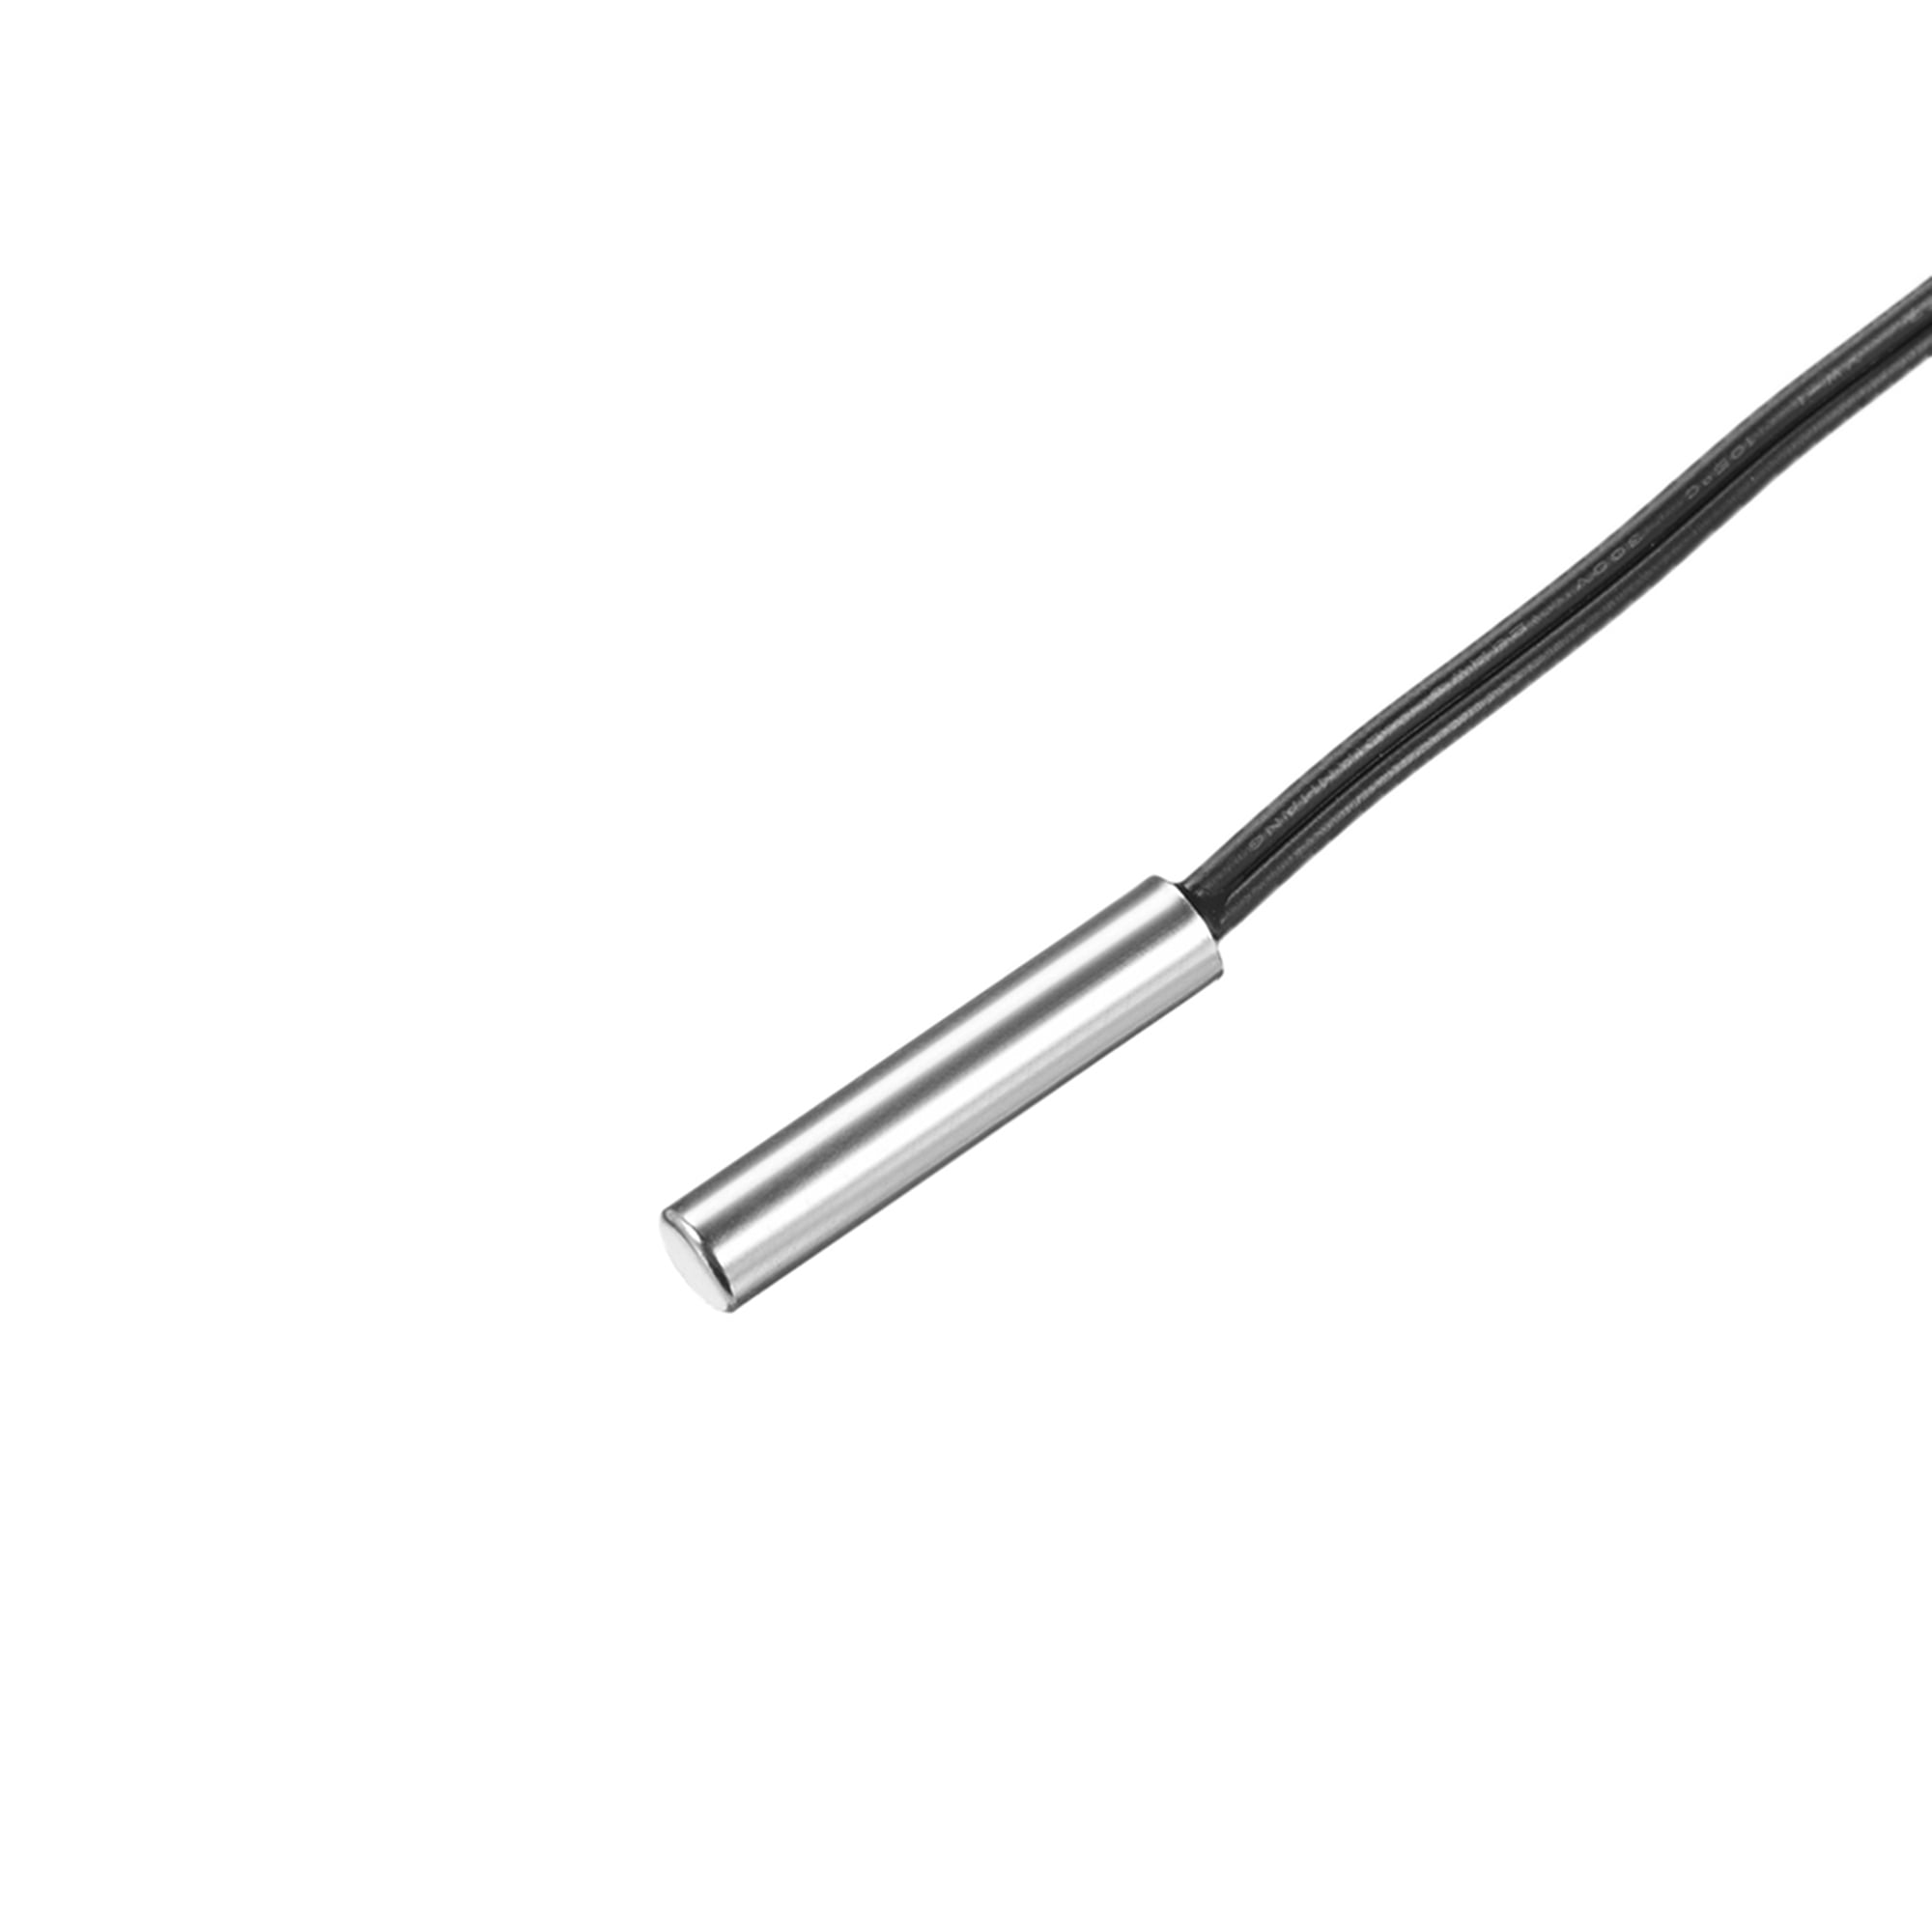 200K NTC thermistor Probe 7.9-inch Stainless Steel Temperature Sensitive Temperature Sensor for air Conditioning 